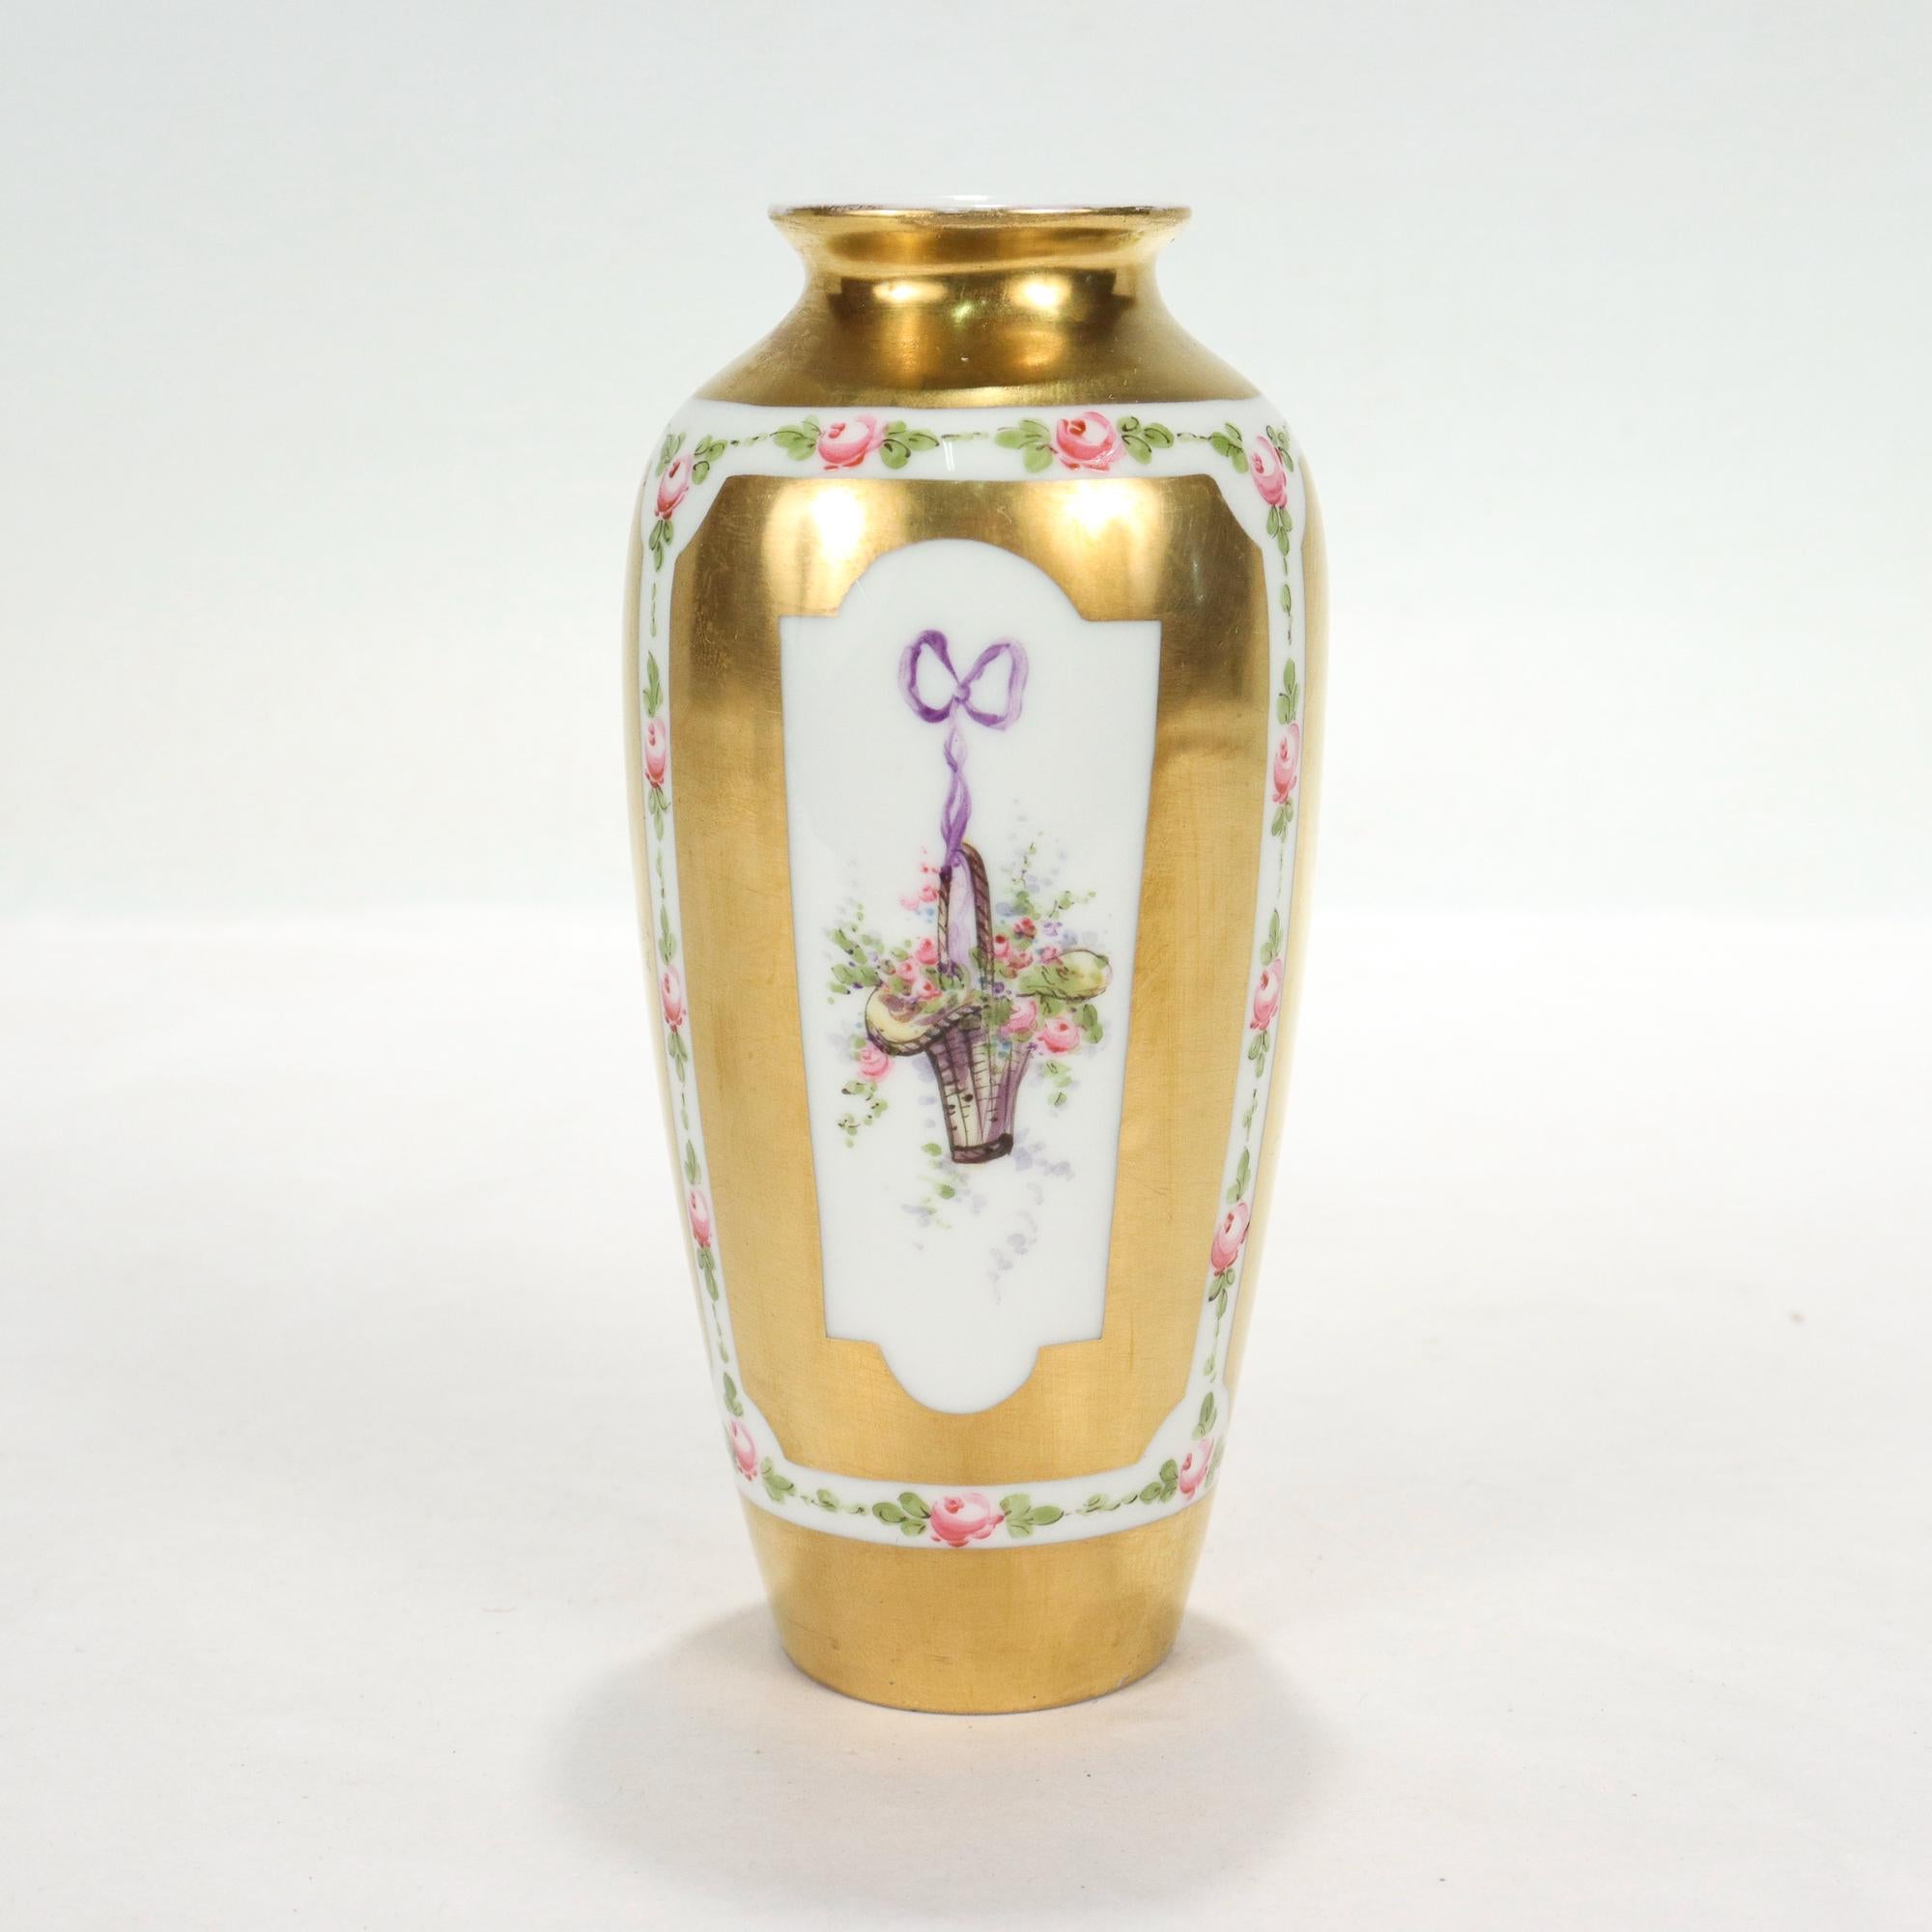 Old Sevres Type Gilt Porcelain Vase with Hand Painted Flower Baskets & Ribbons In Good Condition For Sale In Philadelphia, PA